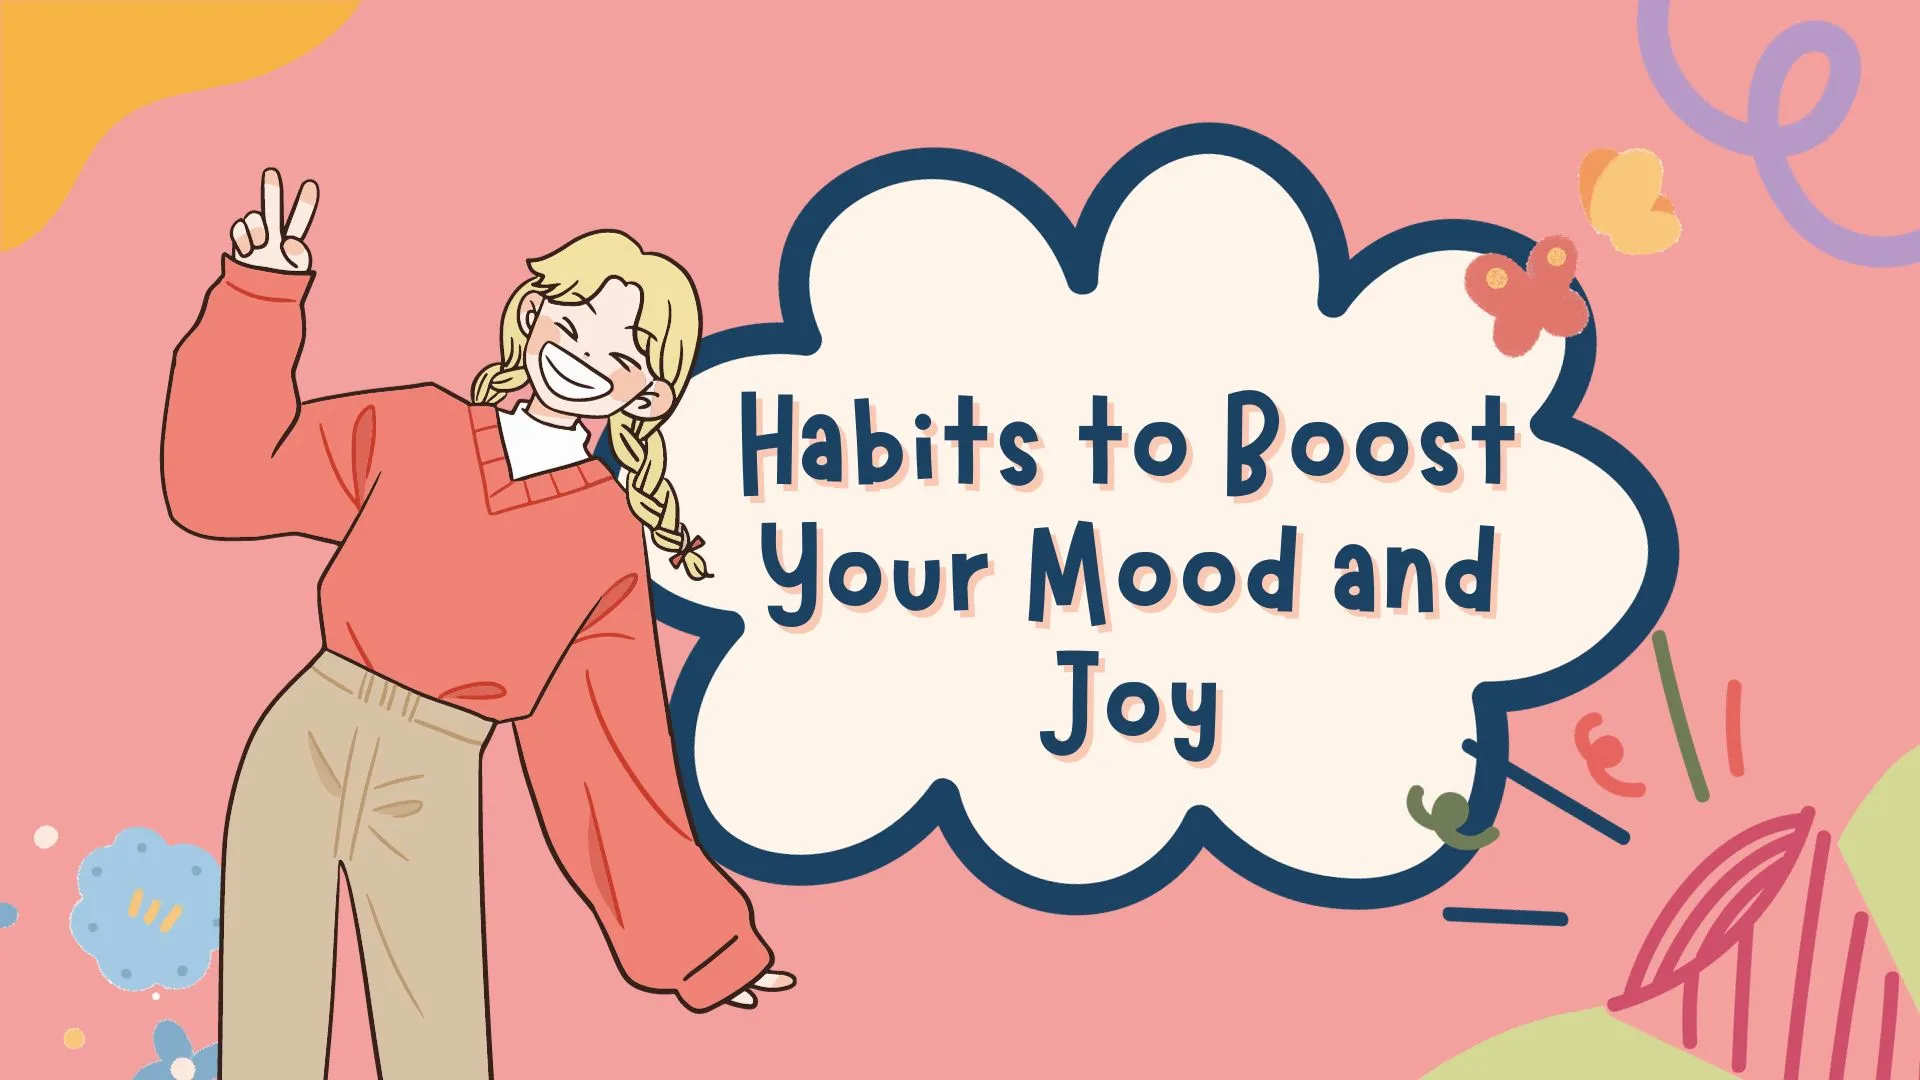 Habits to Boost Your Mood and Joy